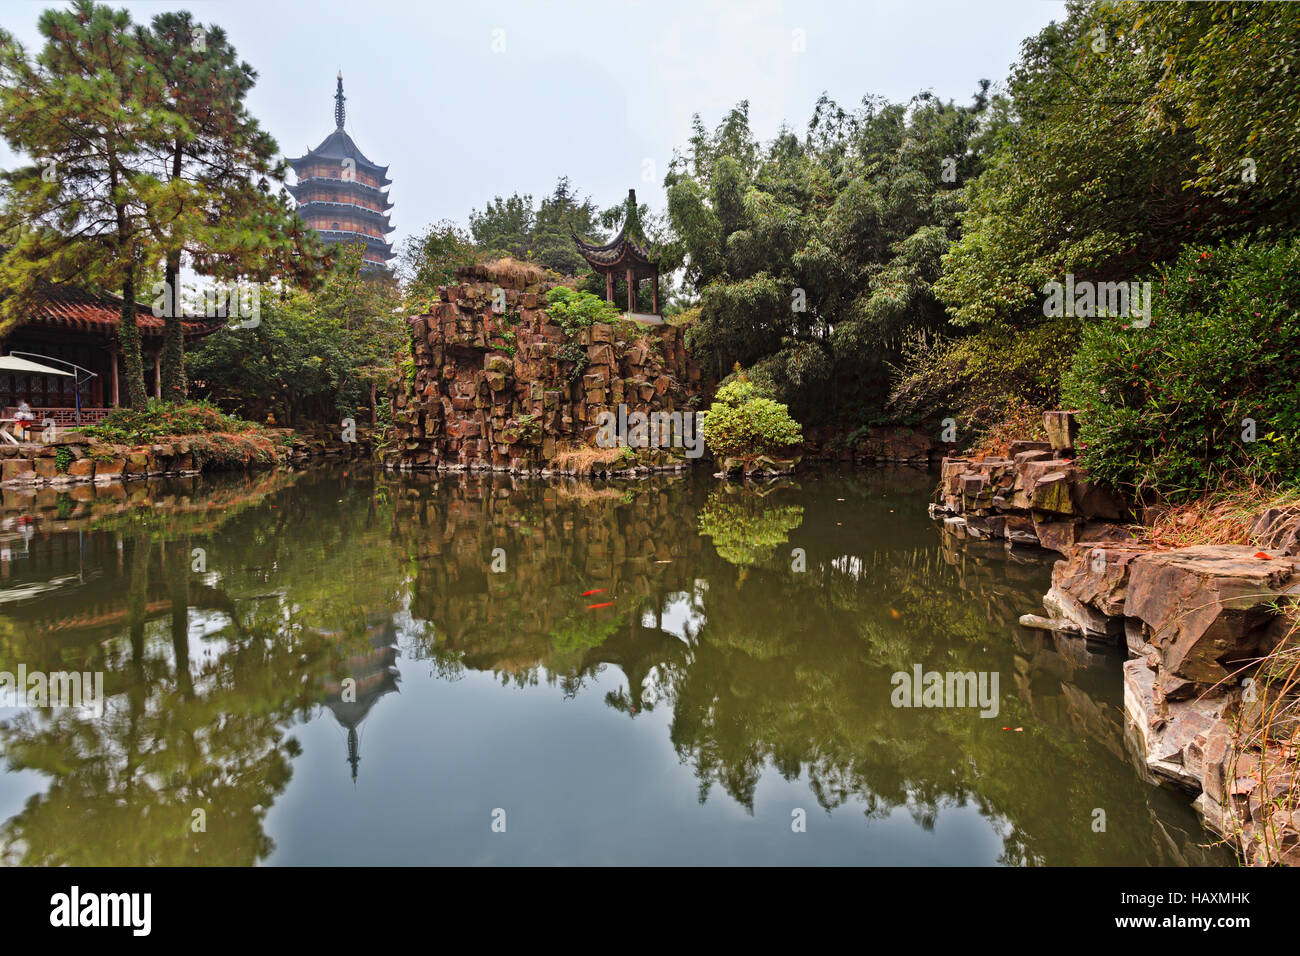 Picturesque traditional chinese garden with calm pond, red carp fish, tall pagoda, pavilions and trees in Suzhou. Stock Photo